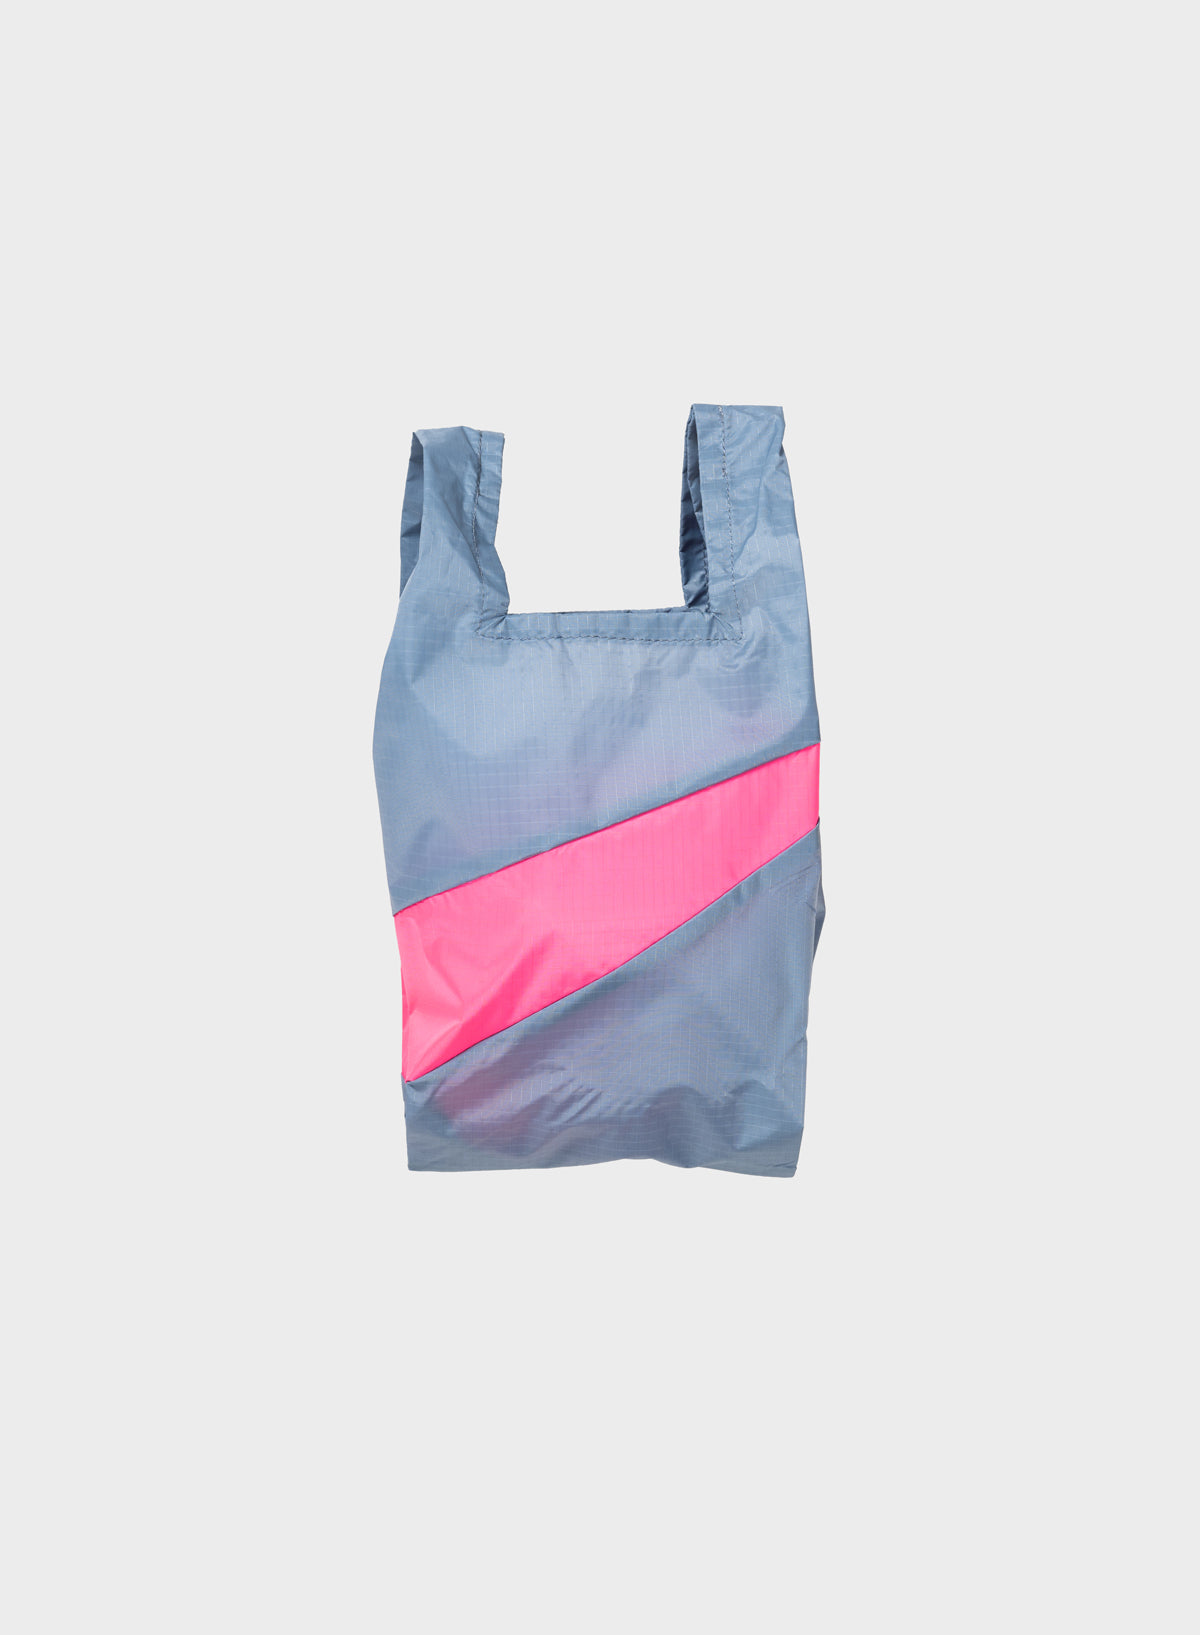 The New Shopping Bag Small